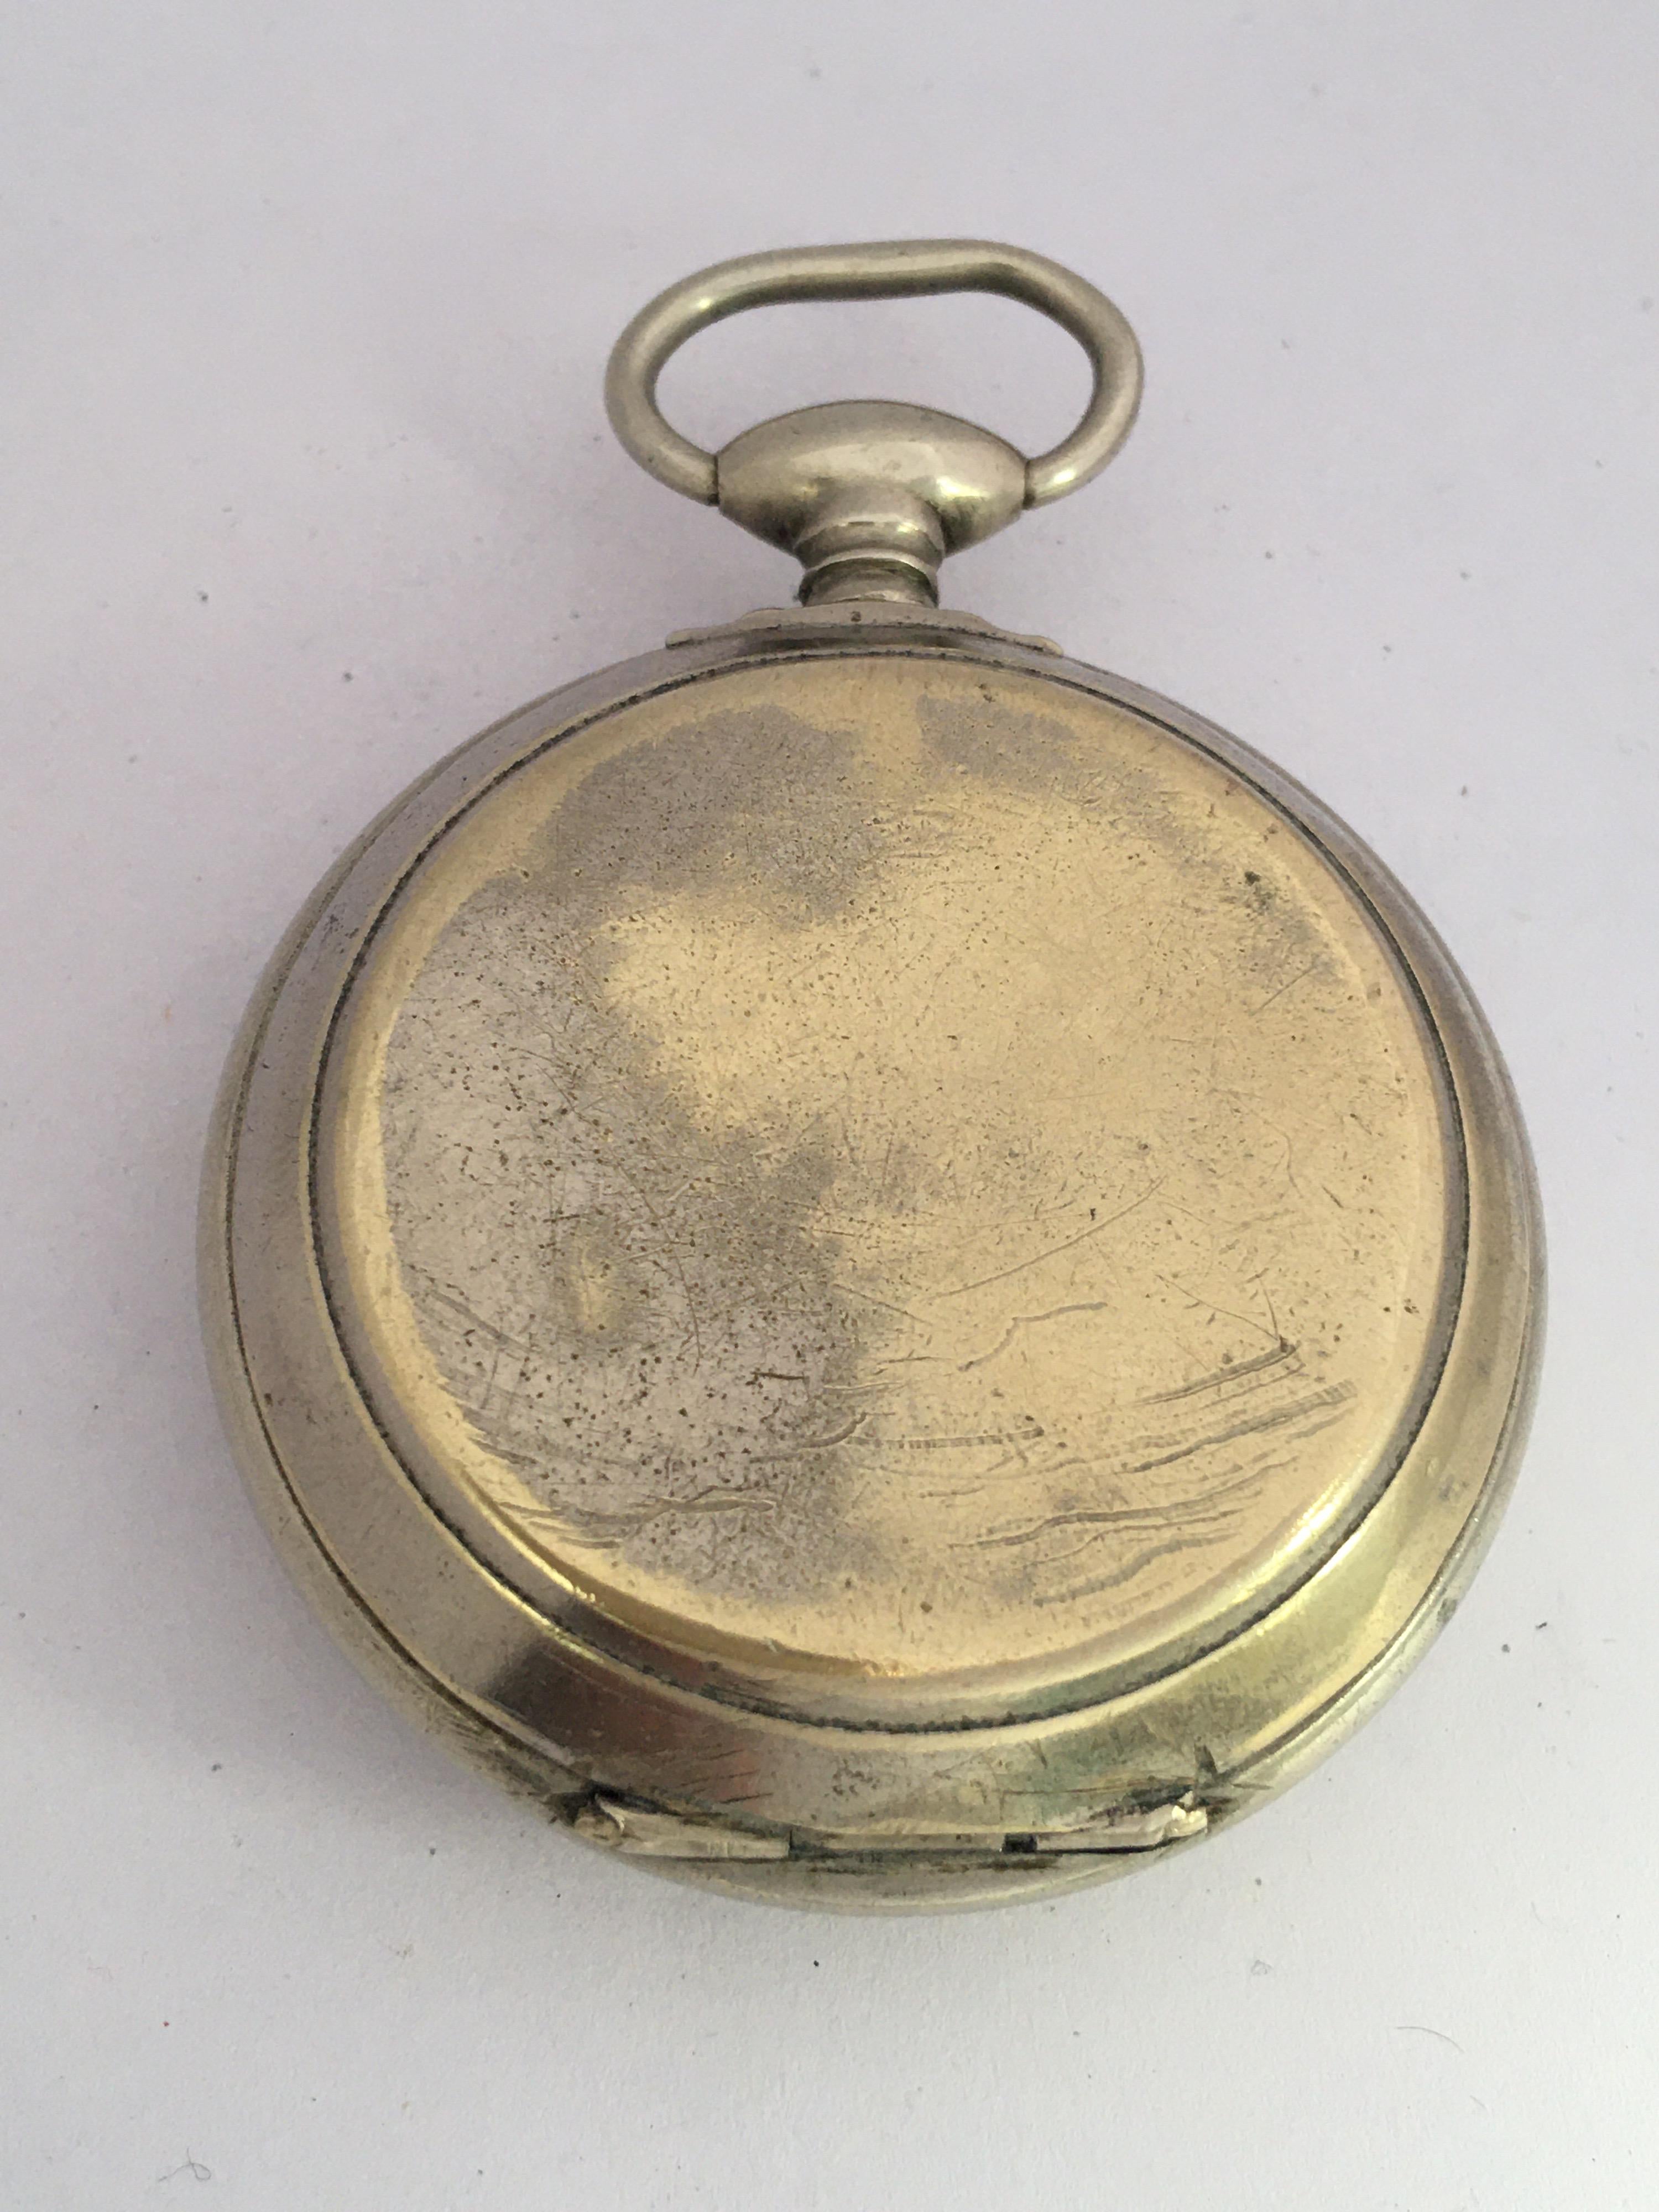 This beautiful antique 49mm diameter key winding pocket watch is in good working condition and it is ticking well. Visible signs of ageing and wear with some scratches on the watch case. There are some tarnish on the back case cover as shown. Please